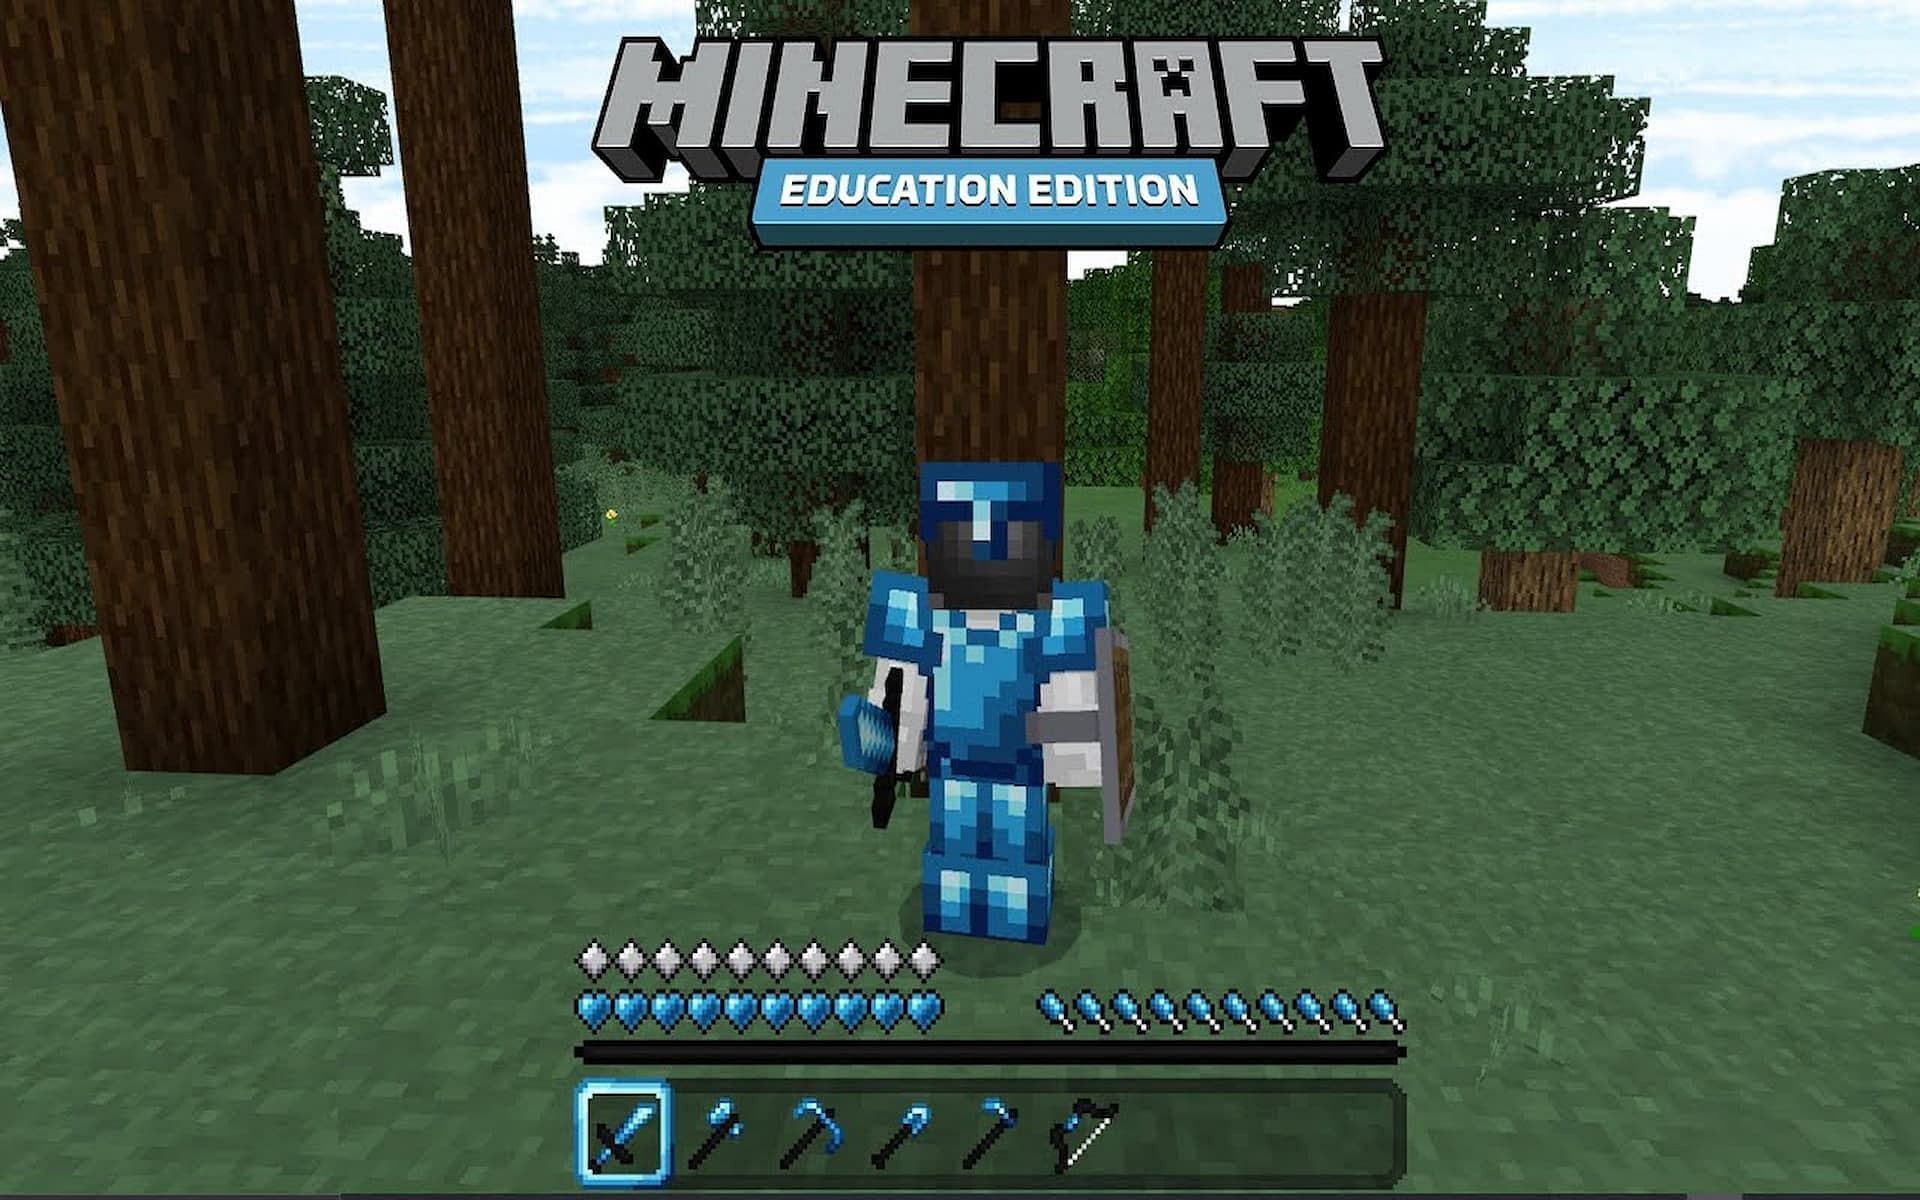 Resource packs allow players to change how the game looks (Image via YouTube/SkyBlue)